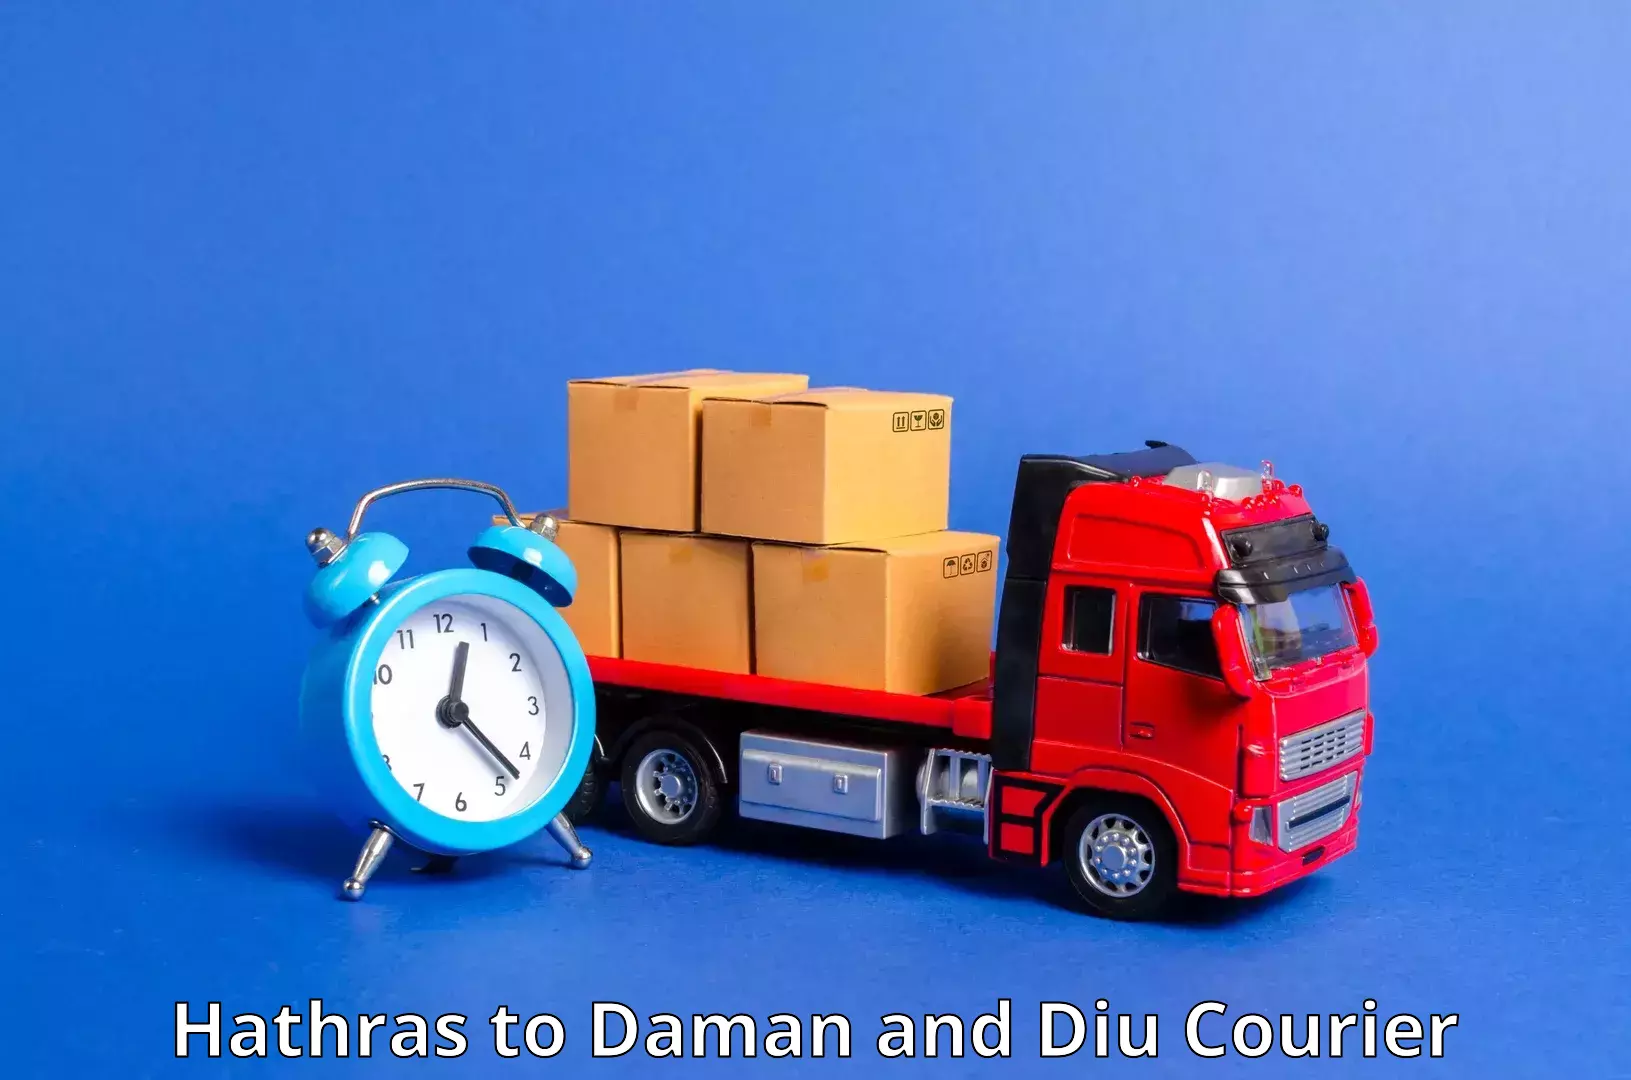 Bulk courier orders Hathras to Daman and Diu